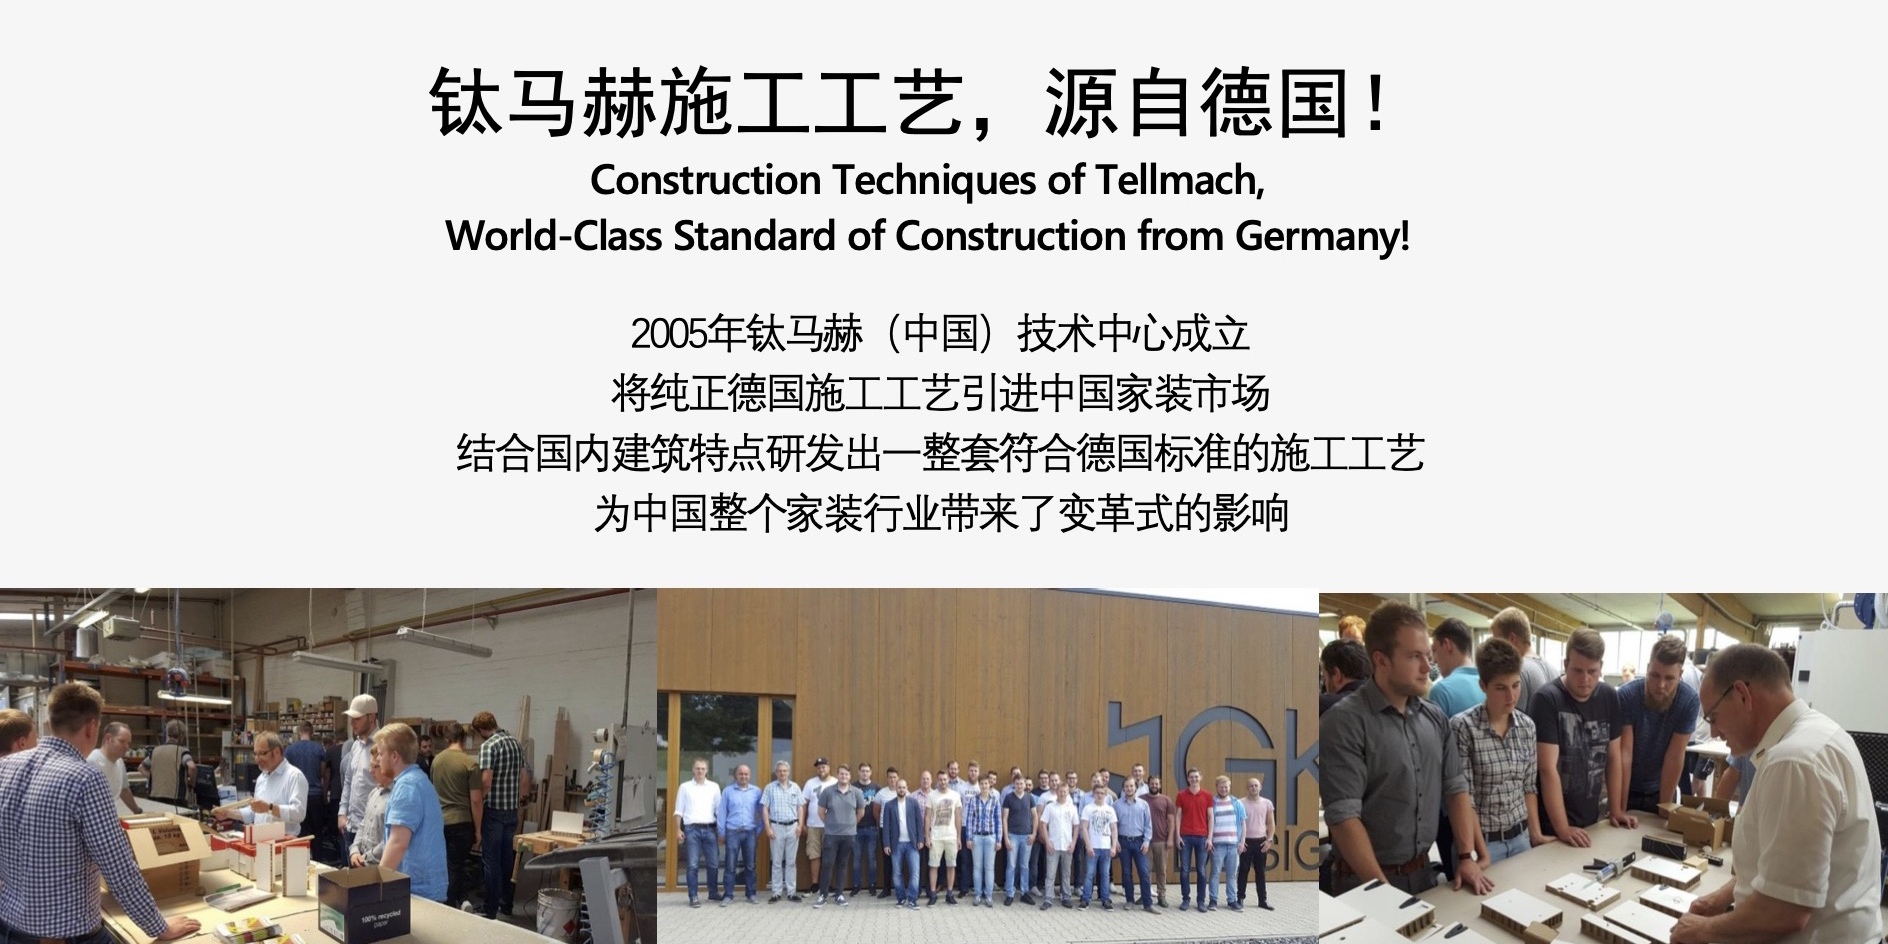 German Energy Center and College GECC cooperate with Titan Mach to release joint technical members